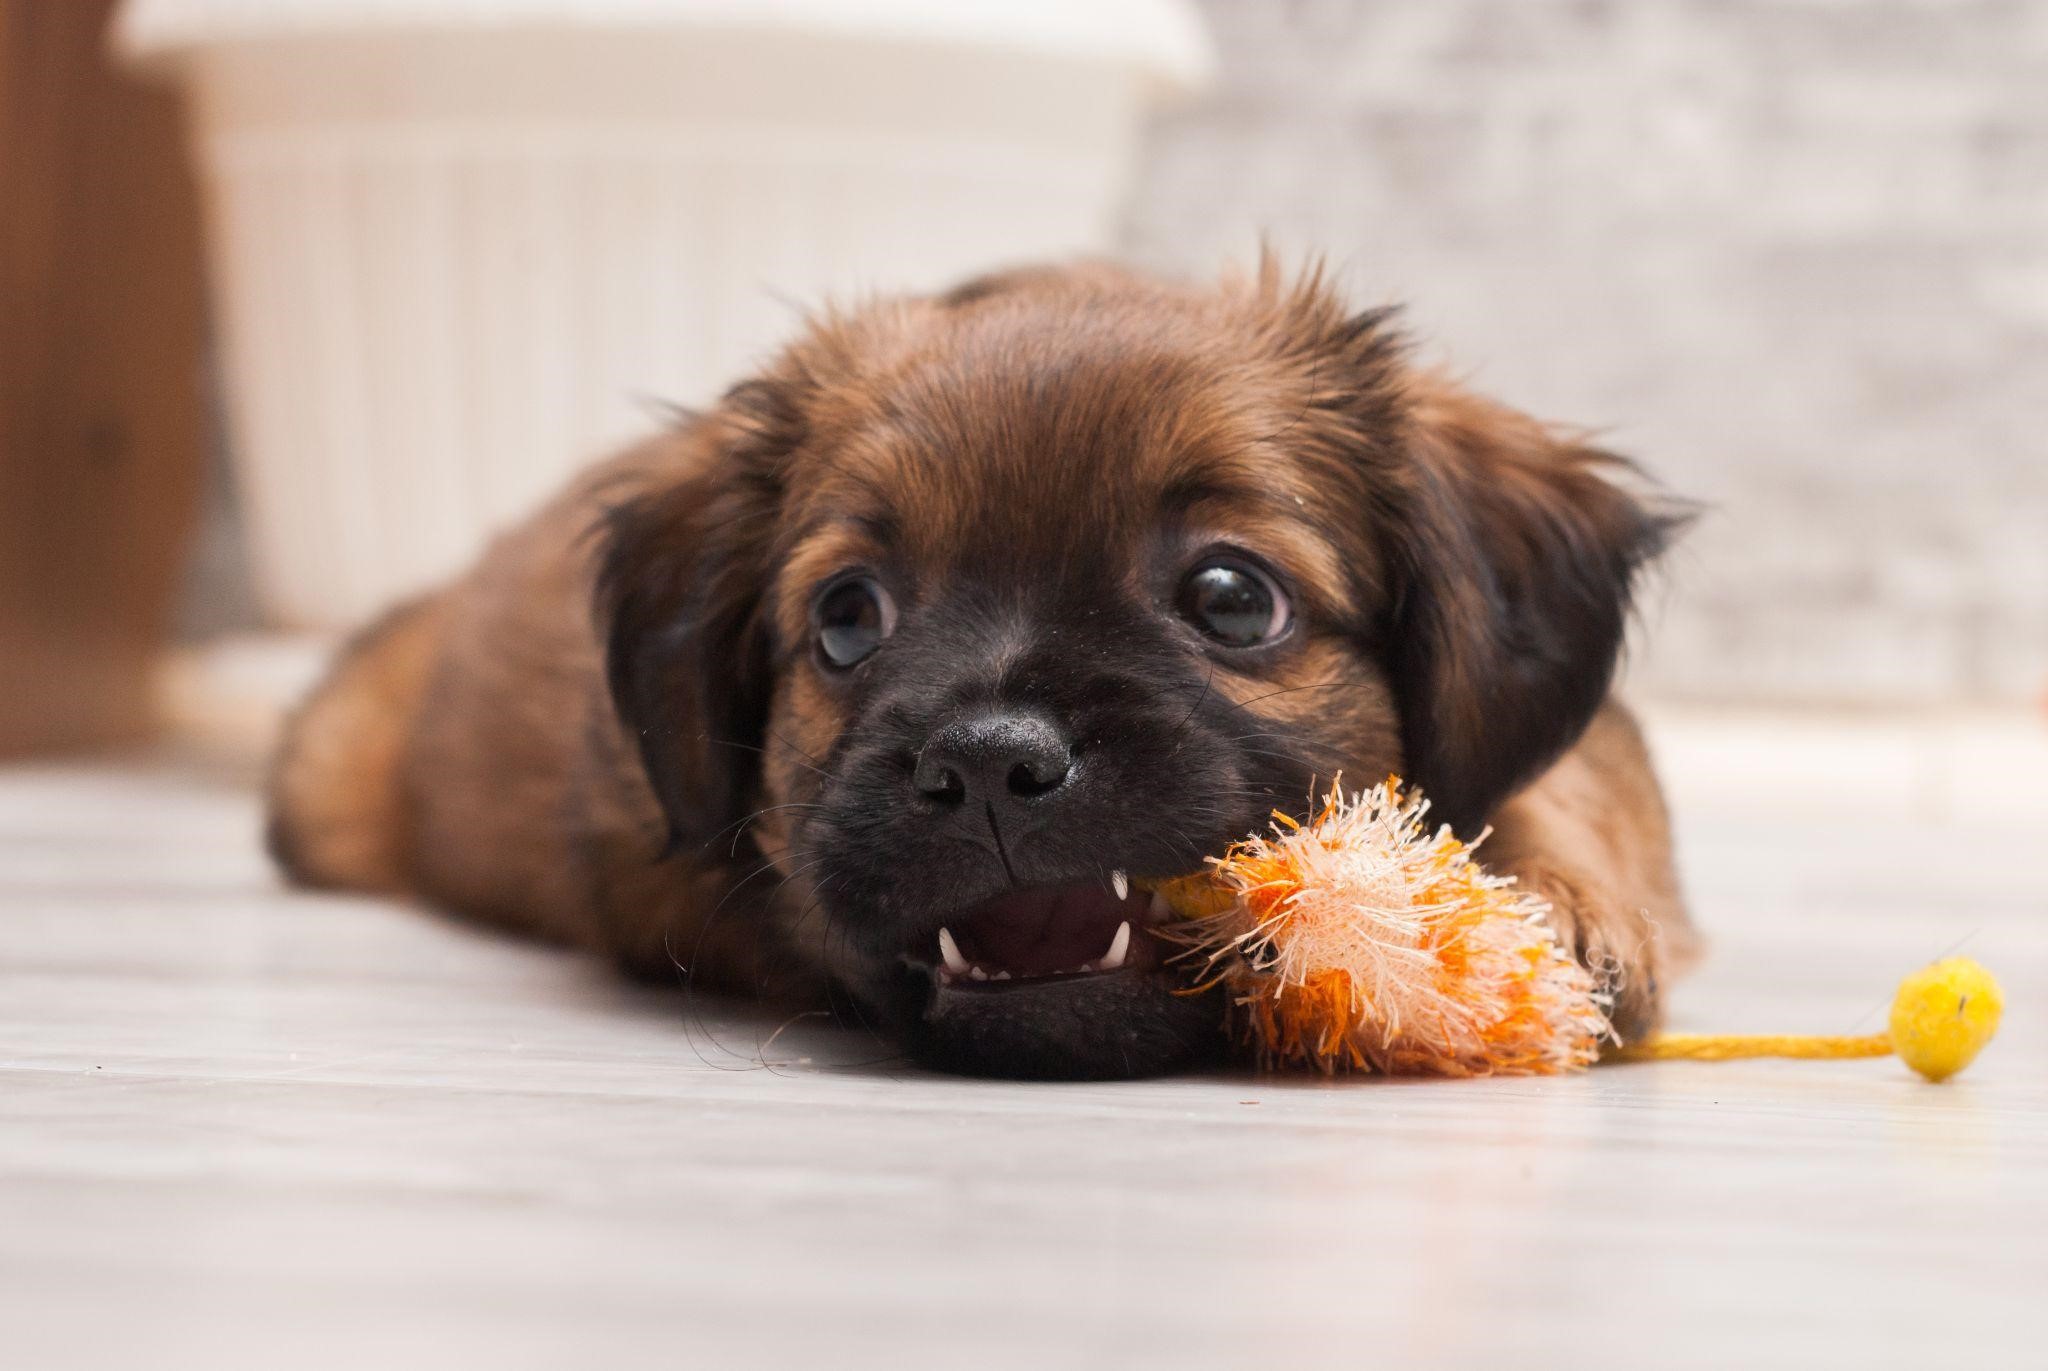 Puppy Teething Toys